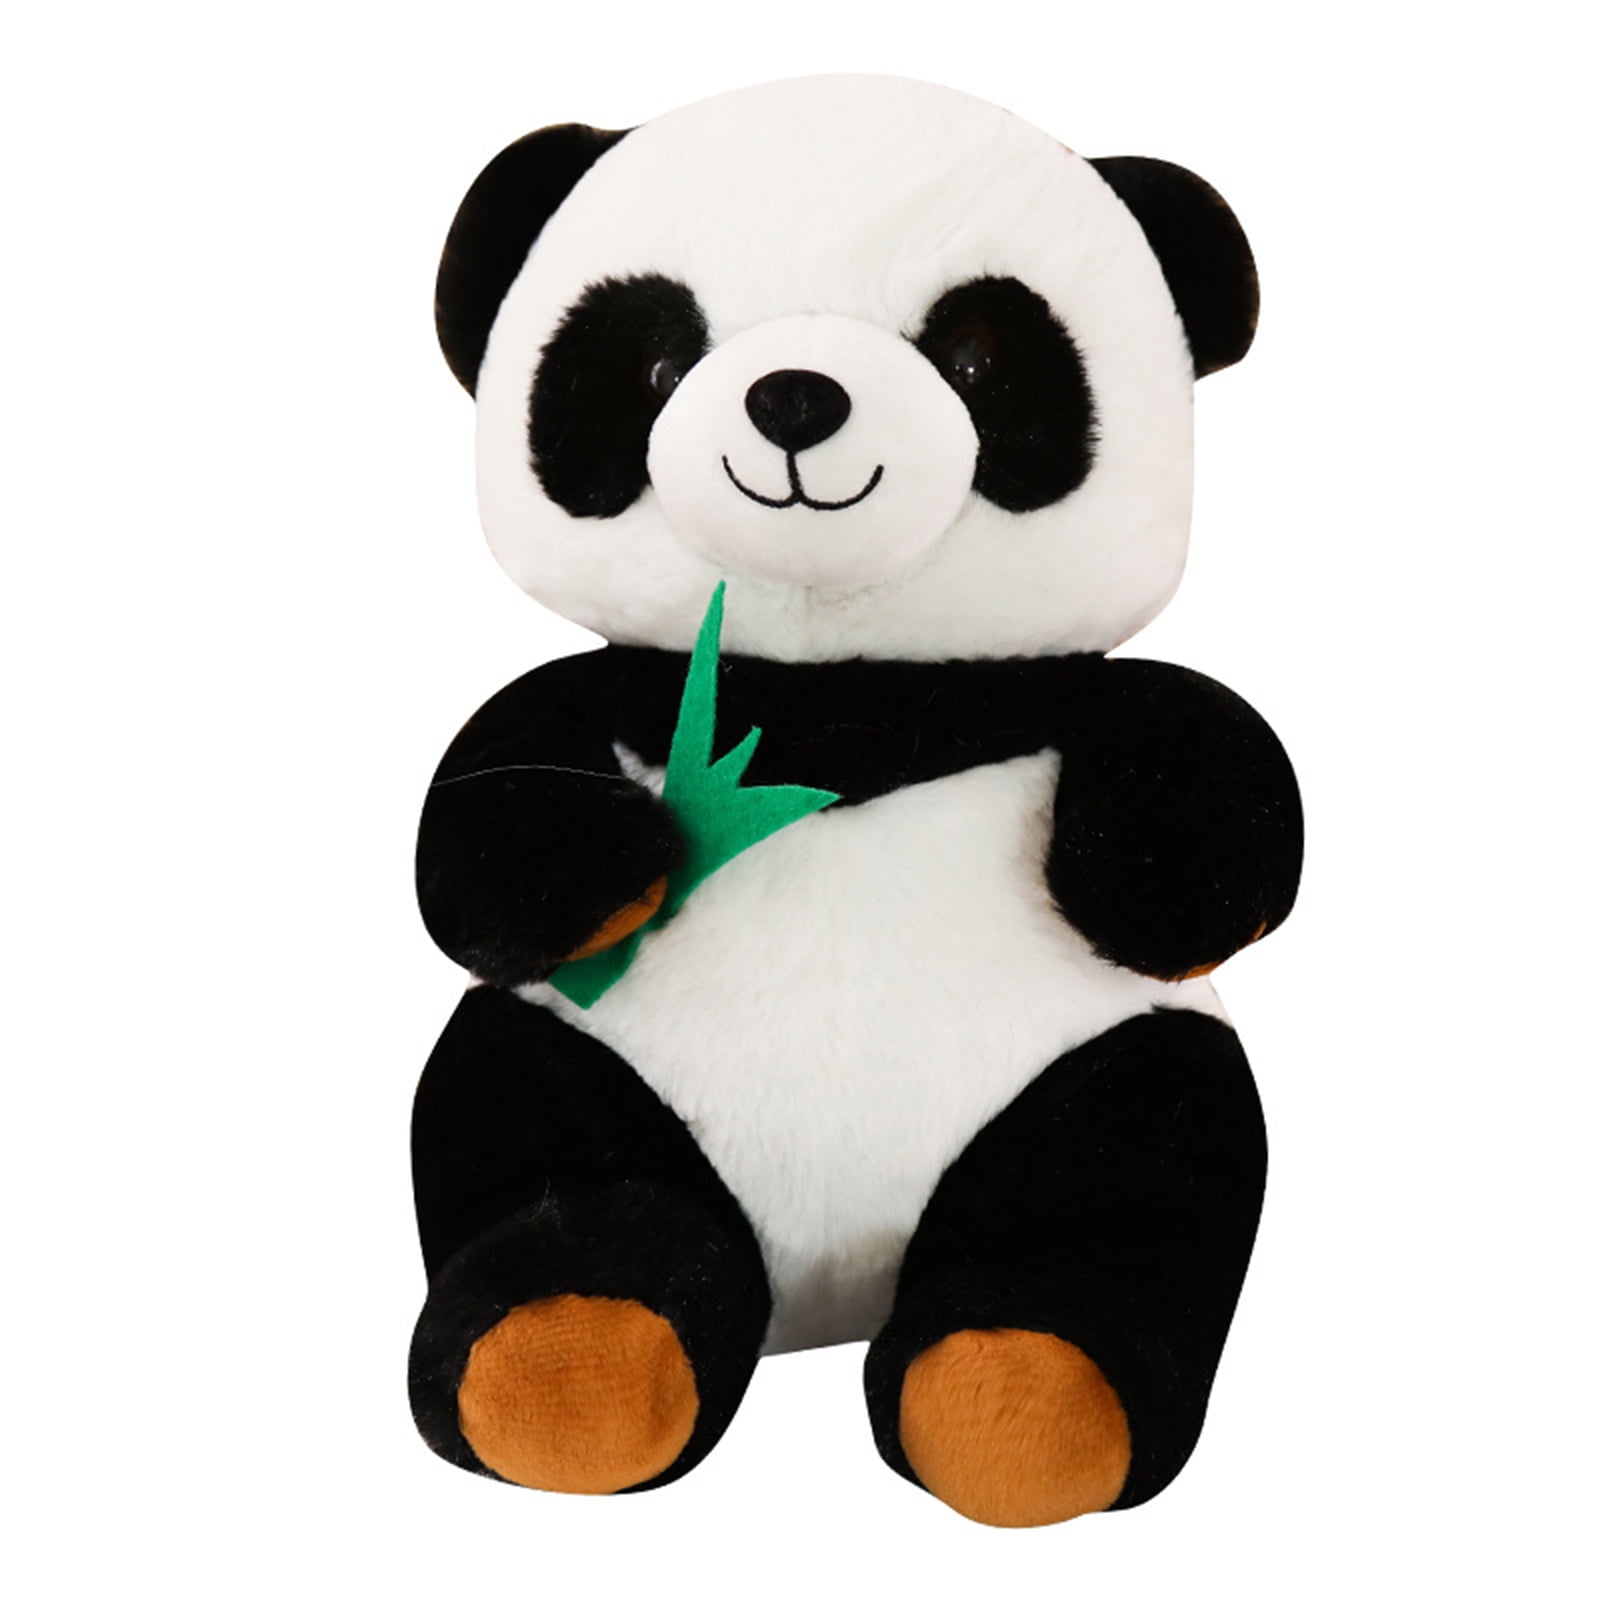 70CM LARGE ENORMOUS PANDA GIFT CUDDLY GIANT SOFT TOY TEDDY HUGE STUFFED BAMBOO 